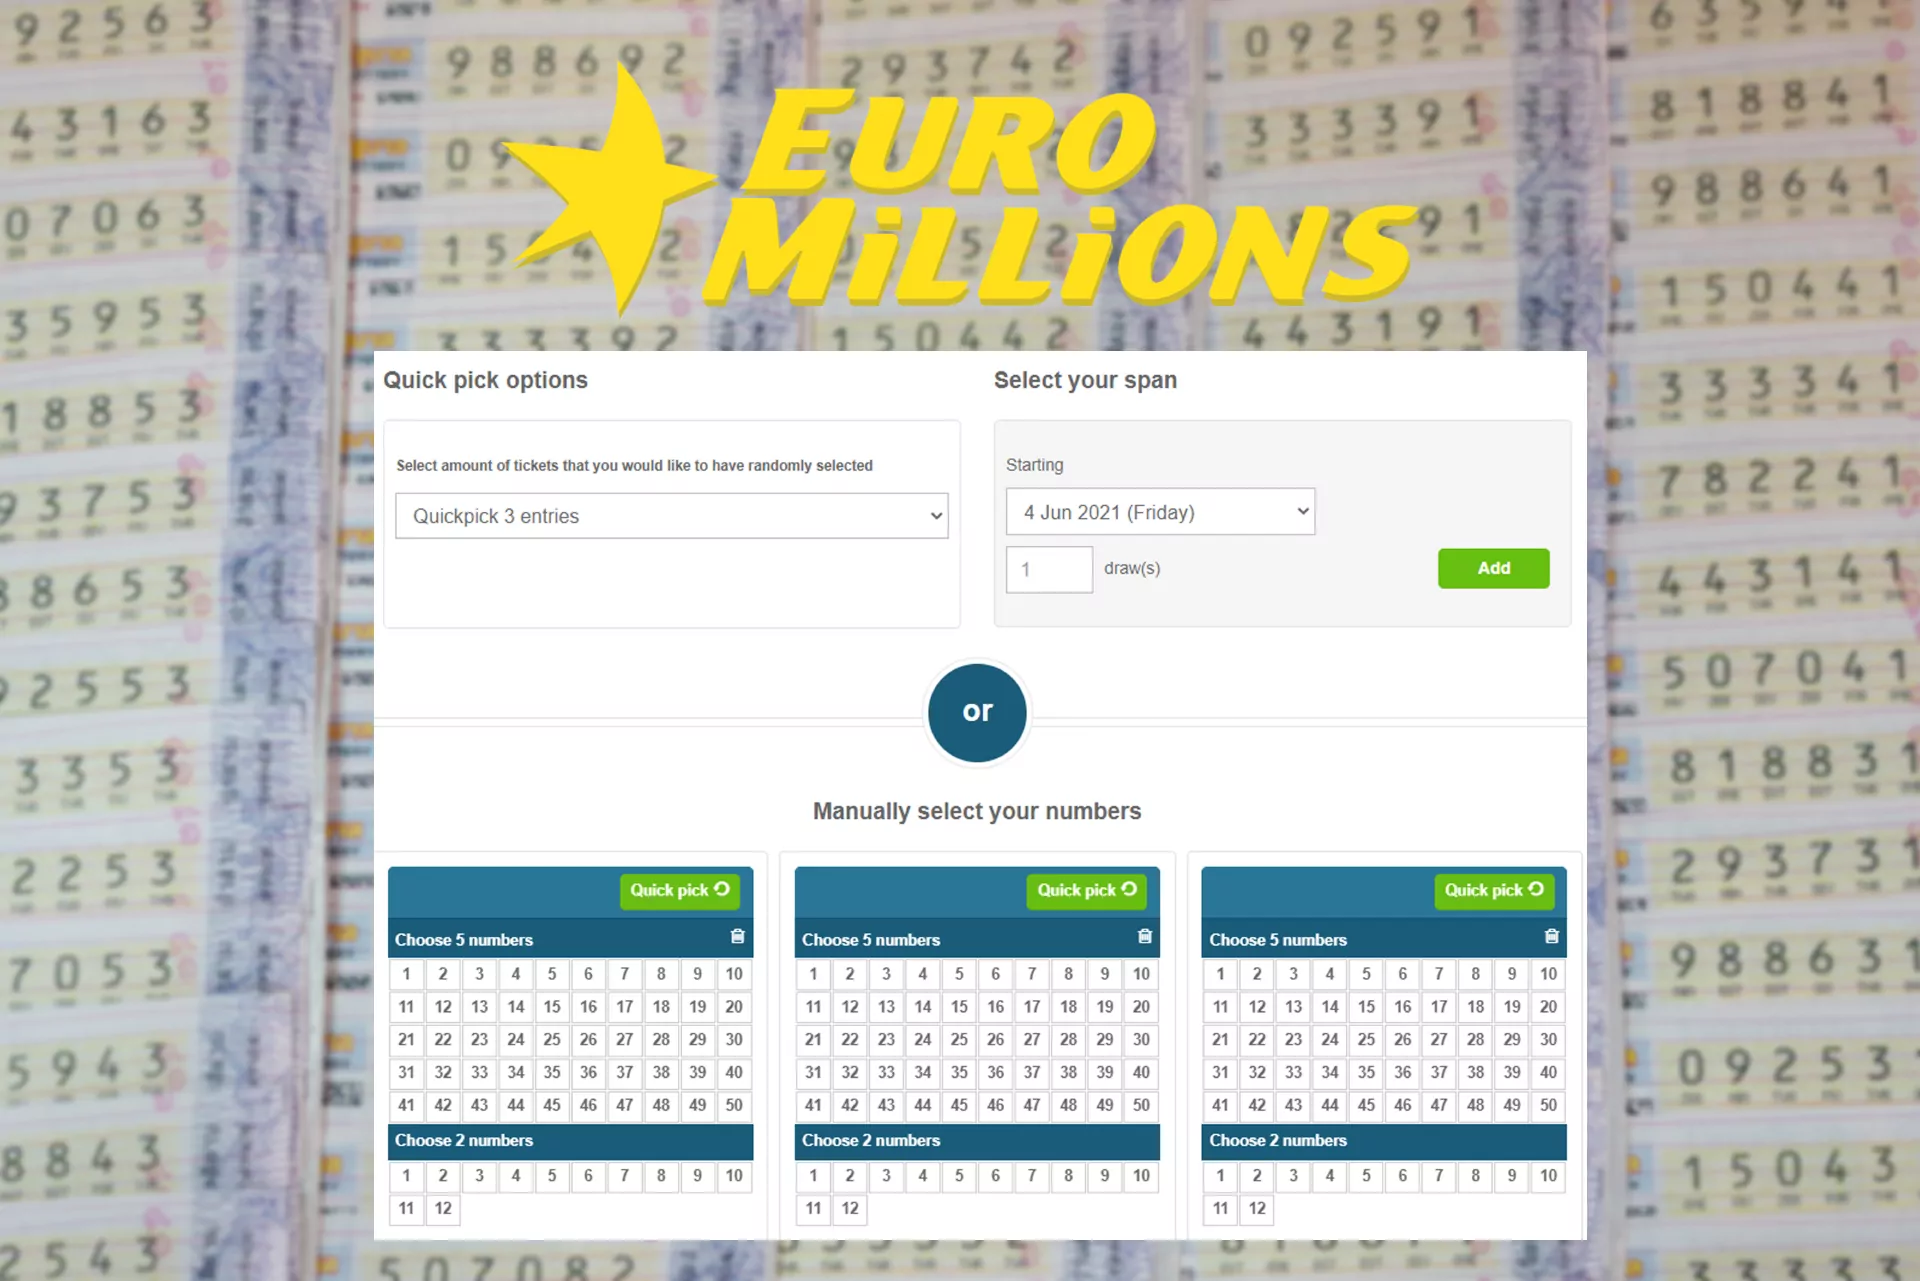 EuroMillions suggests to users to win a jackpot of 190 million euros.